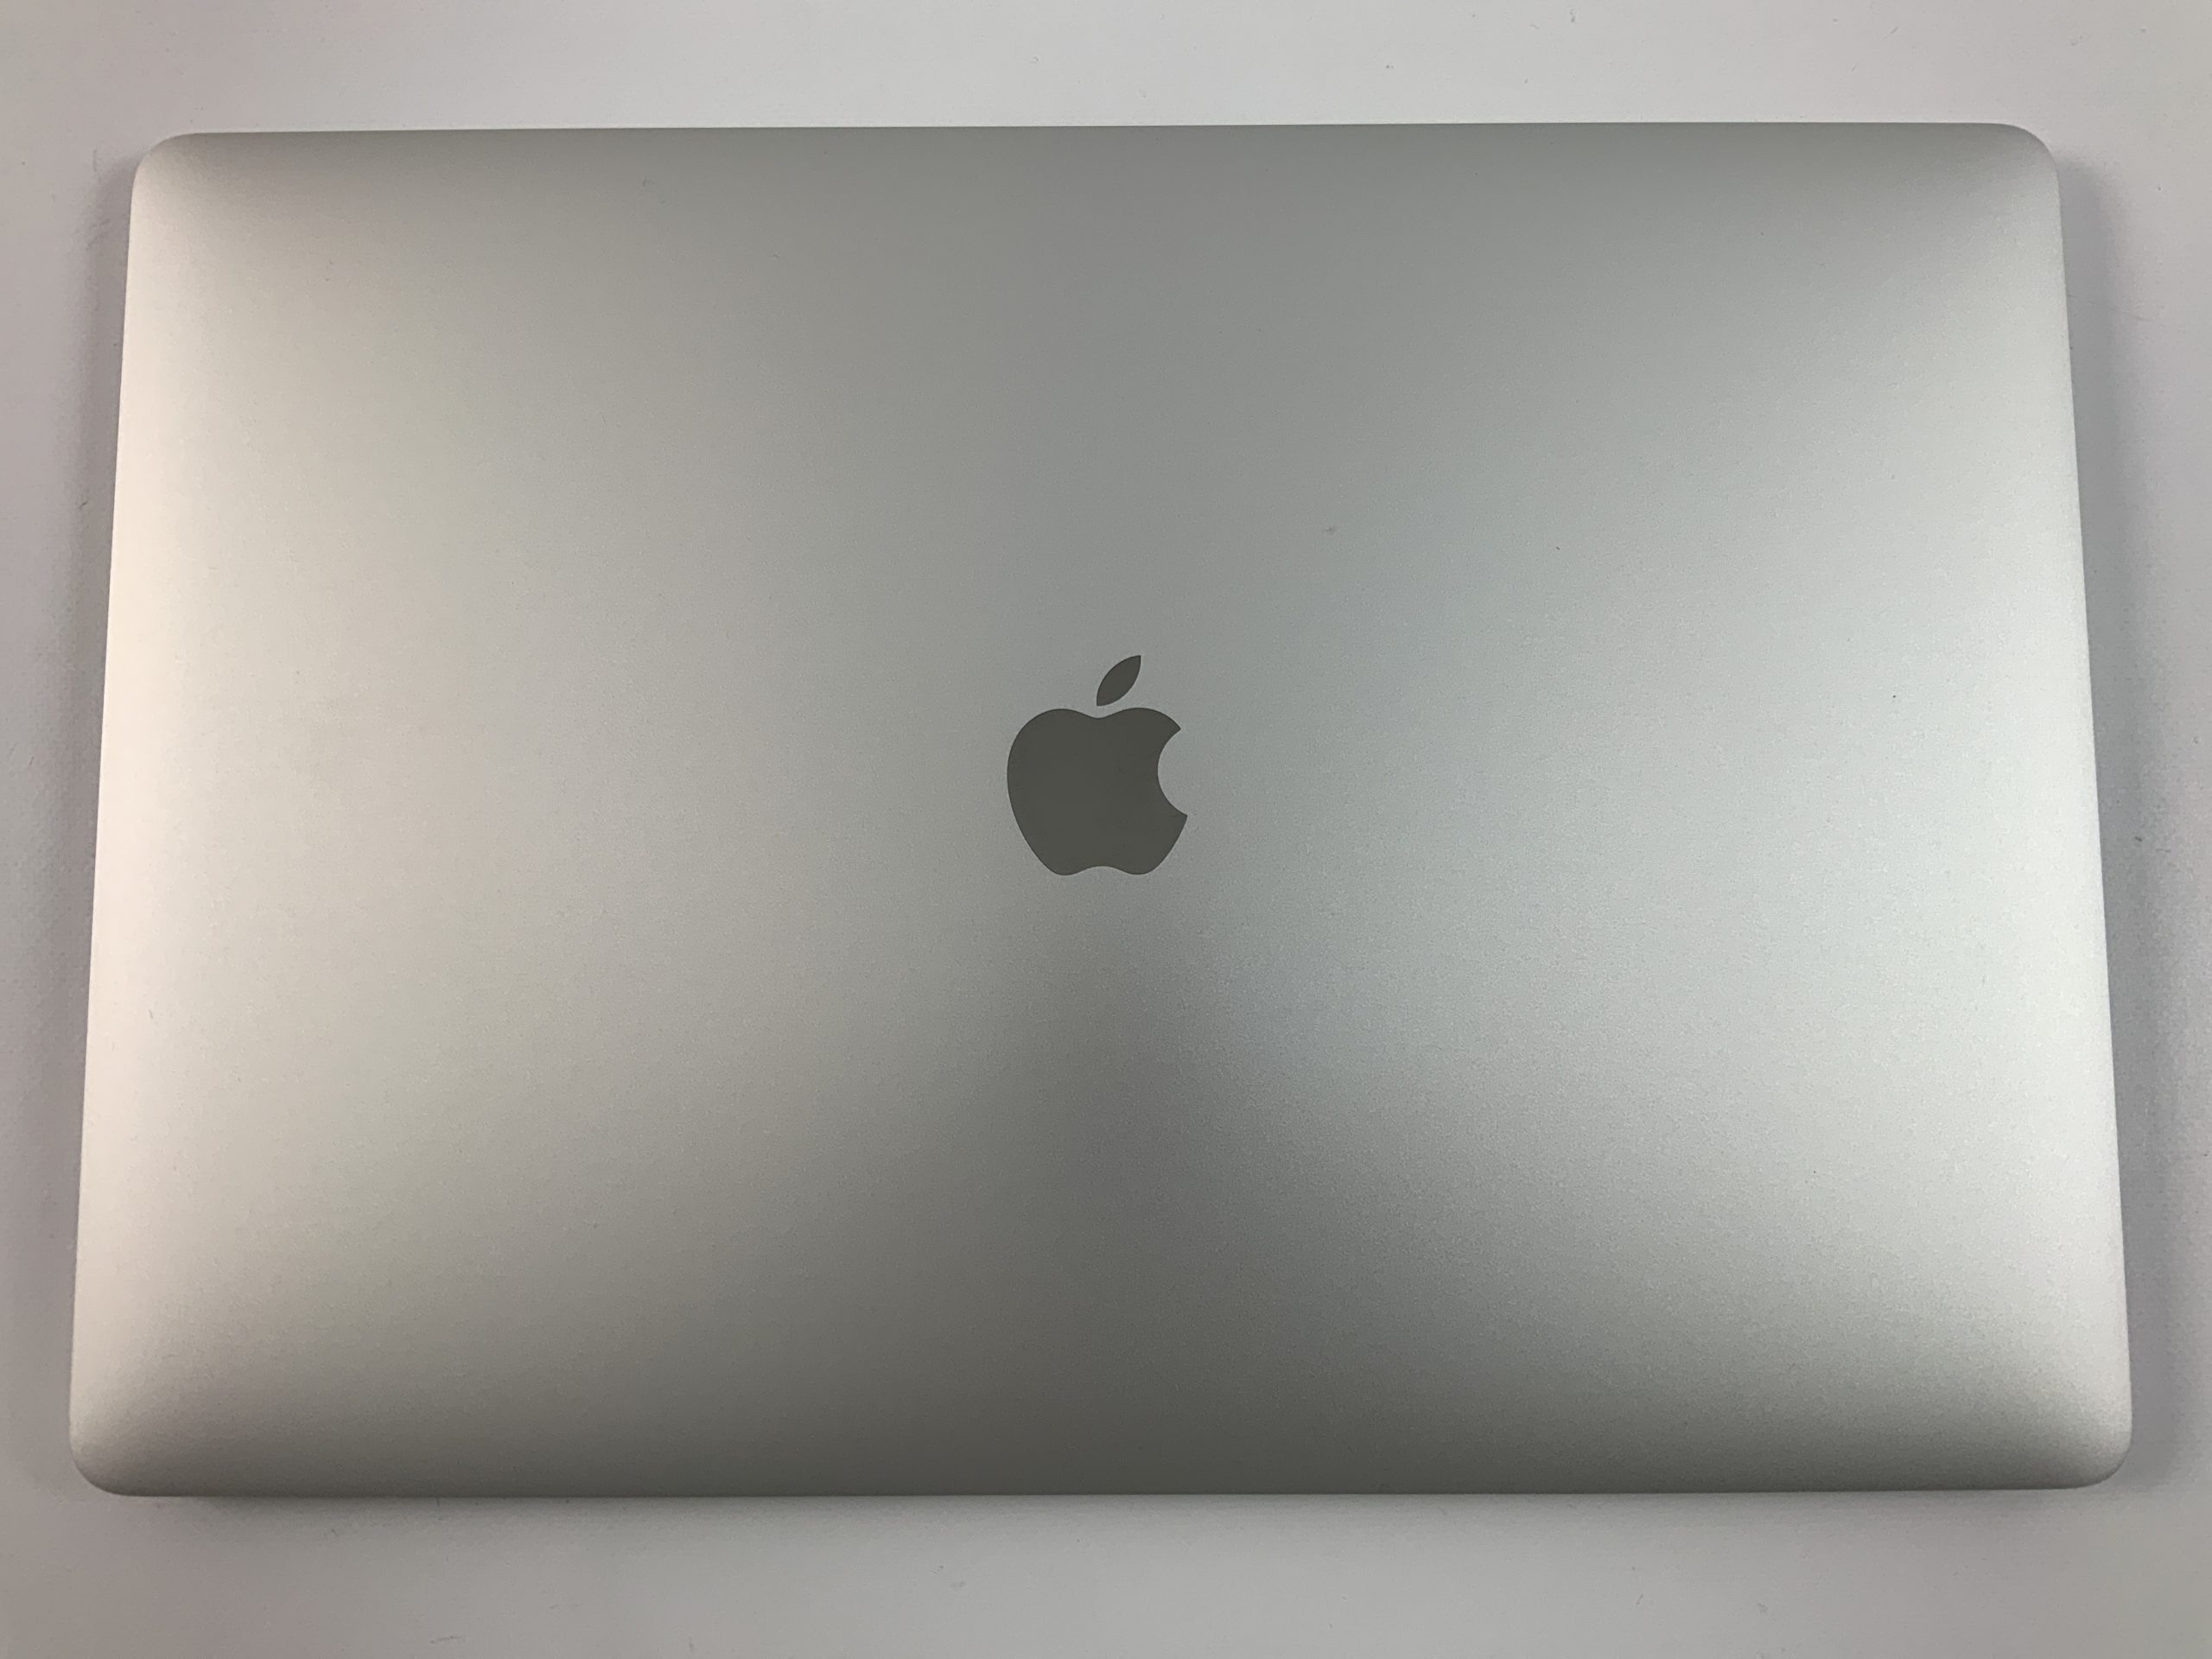 MacBook Pro 15" Touch Bar Mid 2018 (Intel 6-Core i7 2.6 GHz 32 GB RAM 512 GB SSD), Silver, Intel 6-Core i7 2.6 GHz, 32 GB RAM, 512 GB SSD, immagine 3